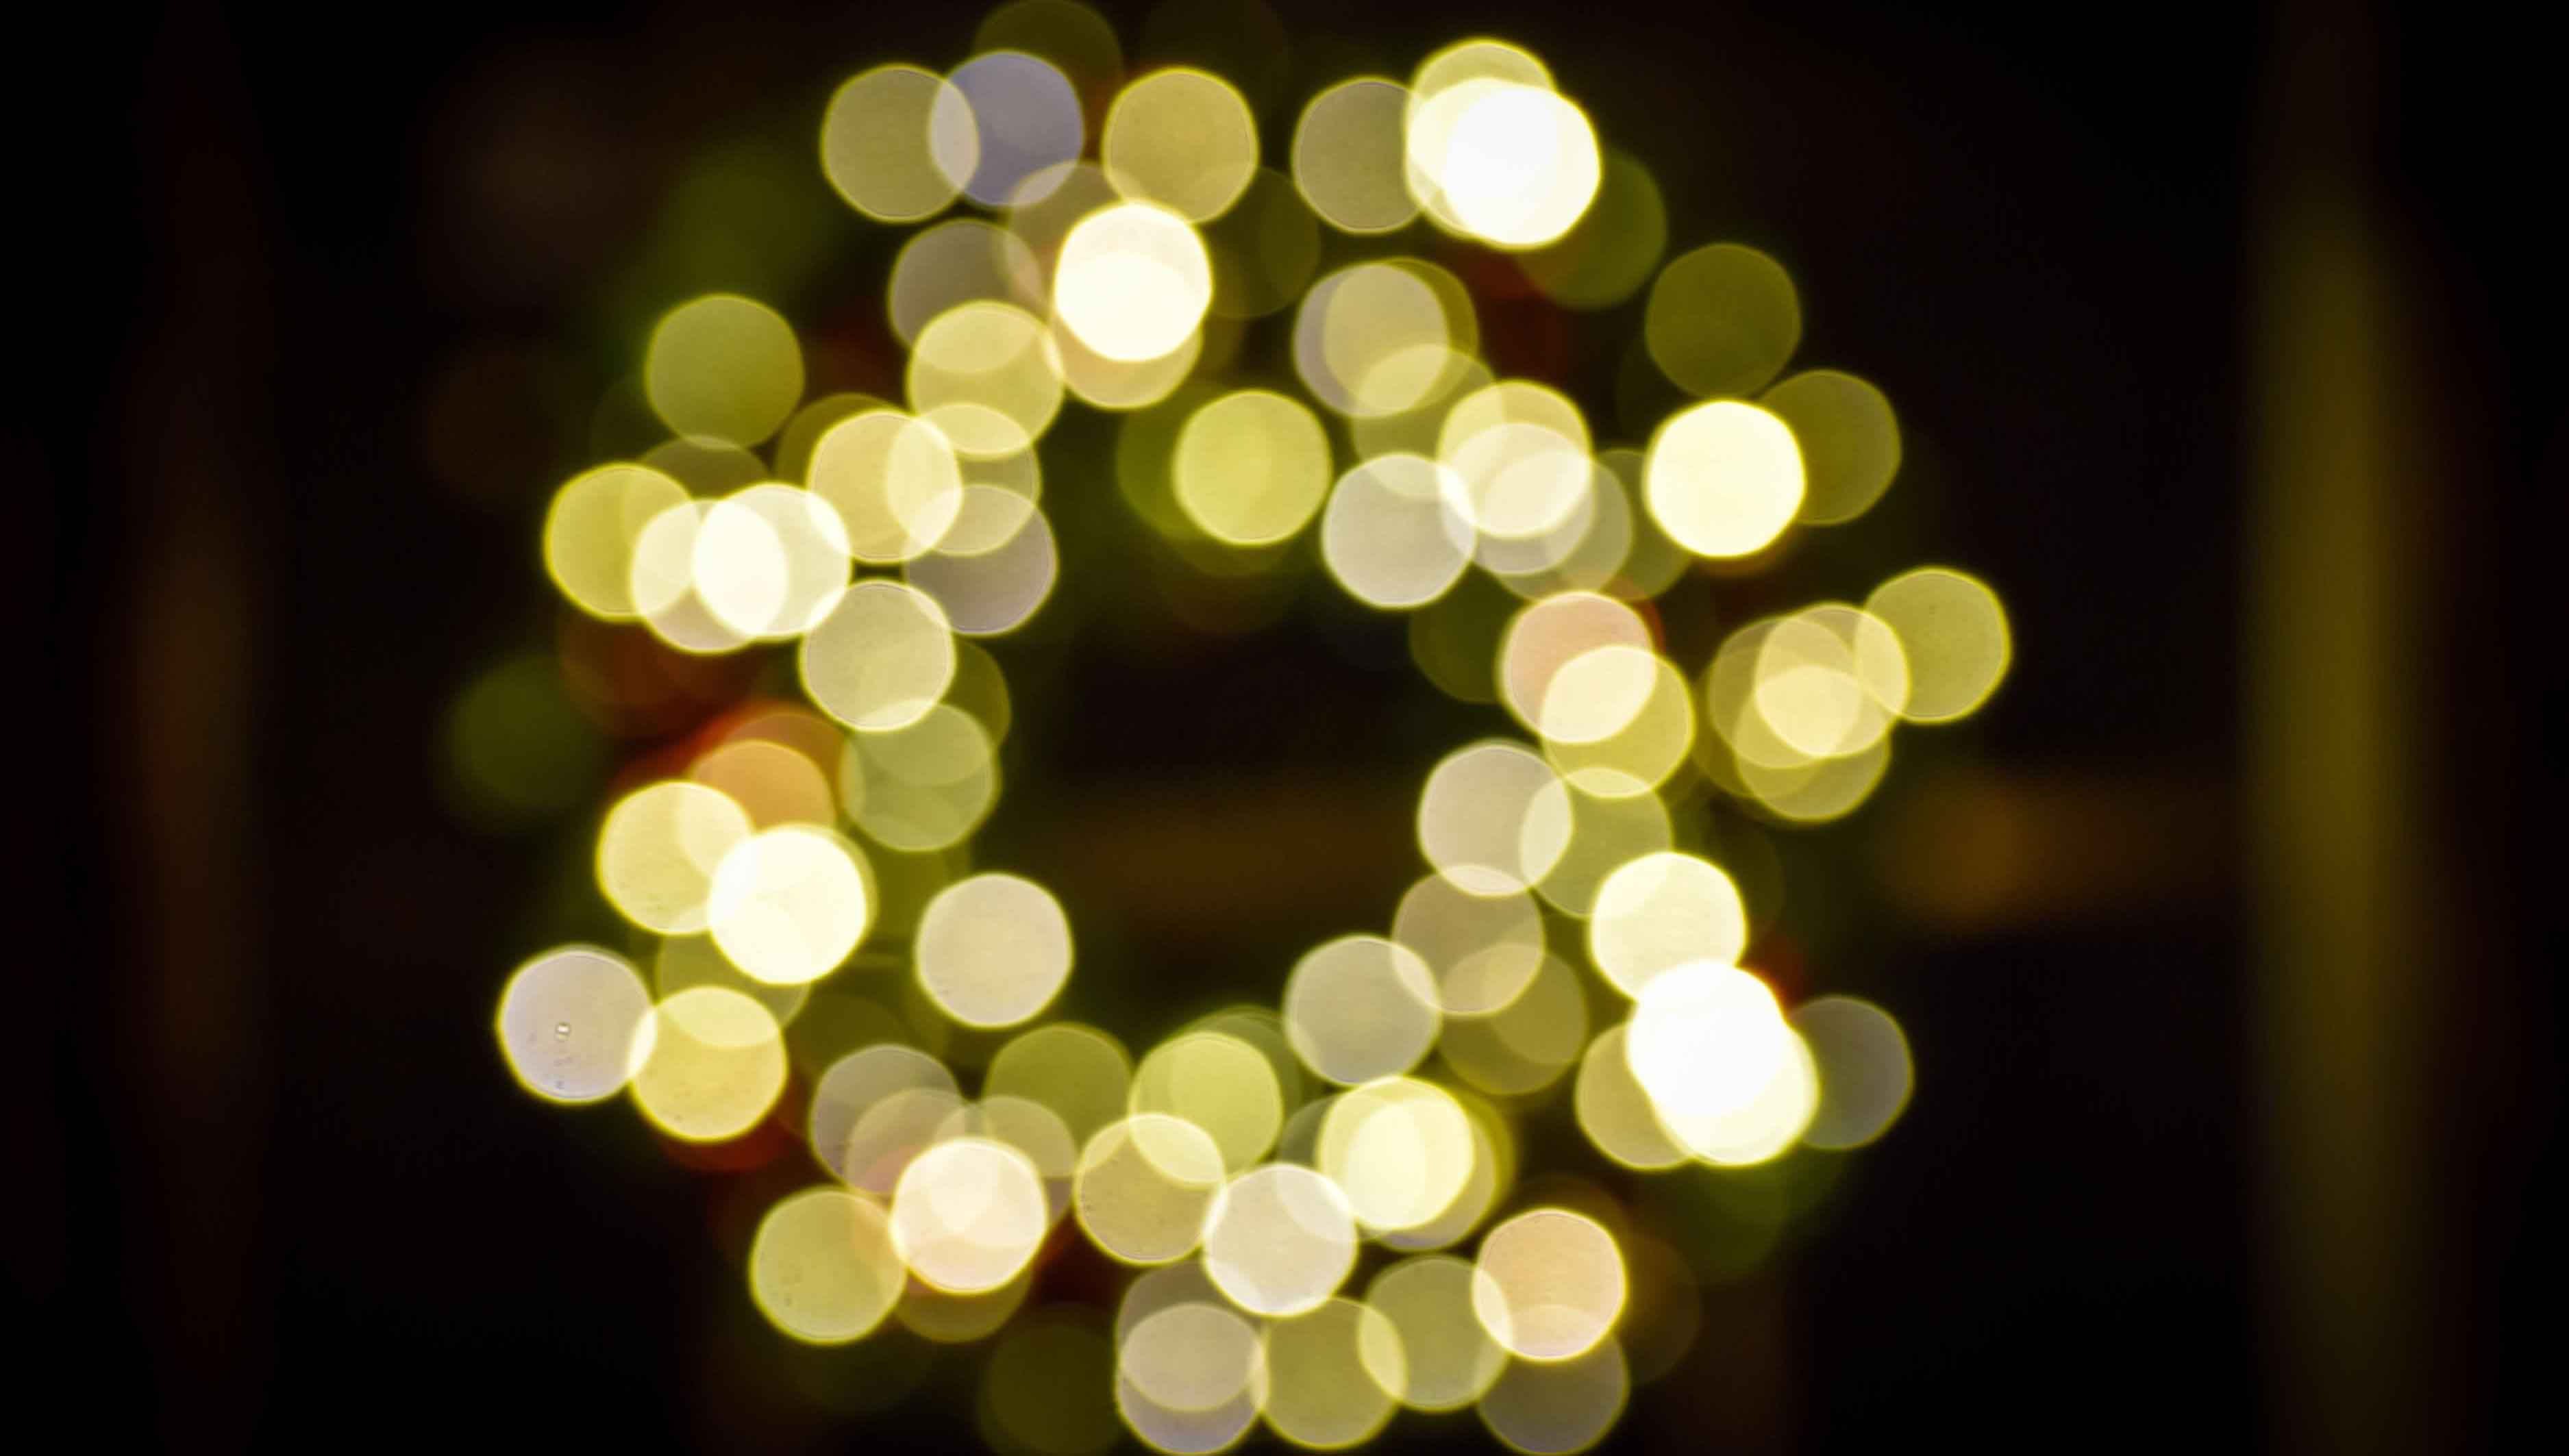 An out-of-focus Christmas wreath adorned with lights.